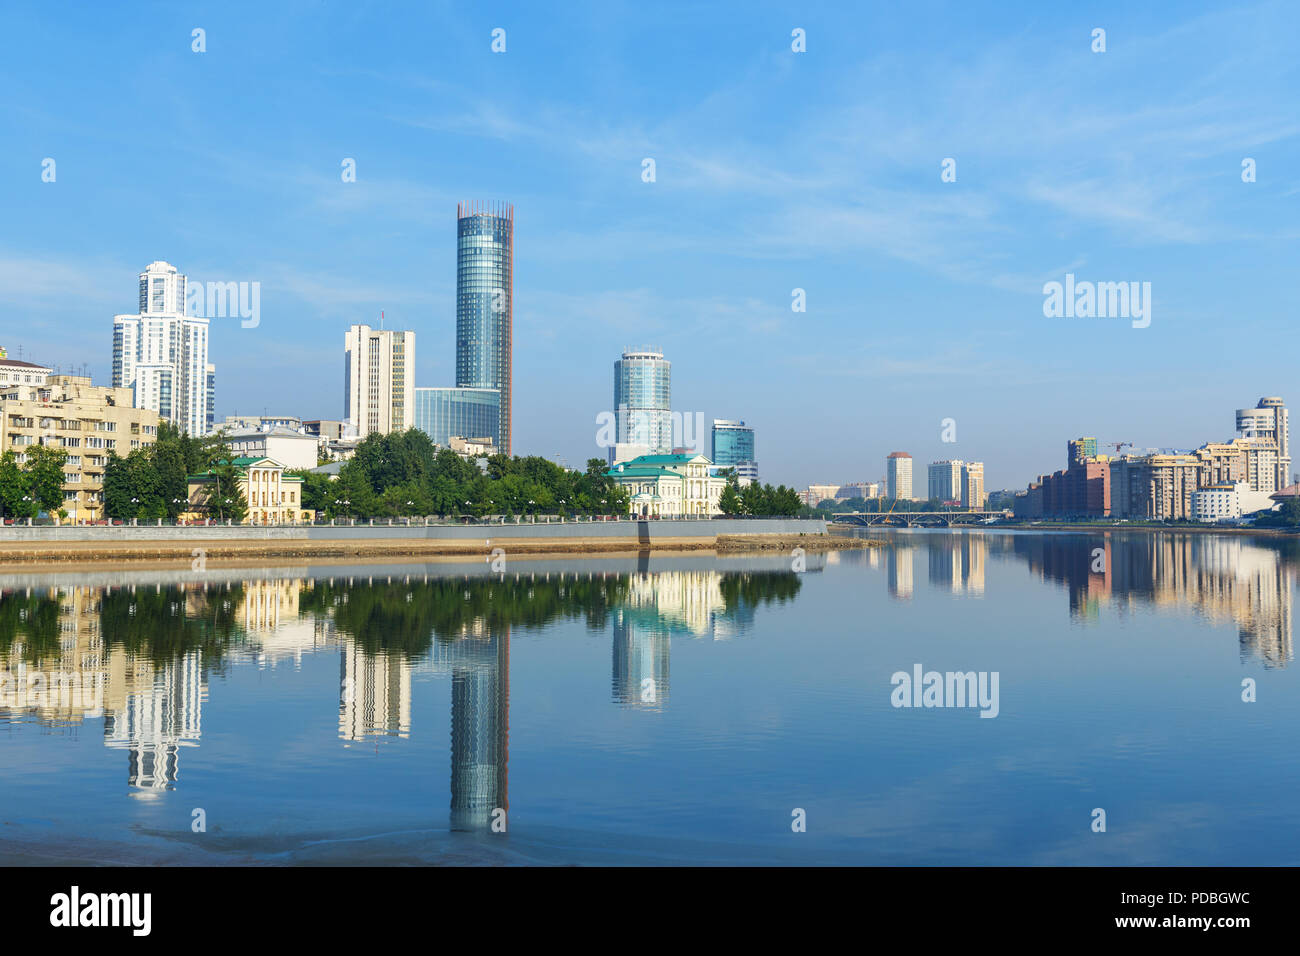 View of Yekaterinburg city center skyline and Iset river. Russia Stock Photo